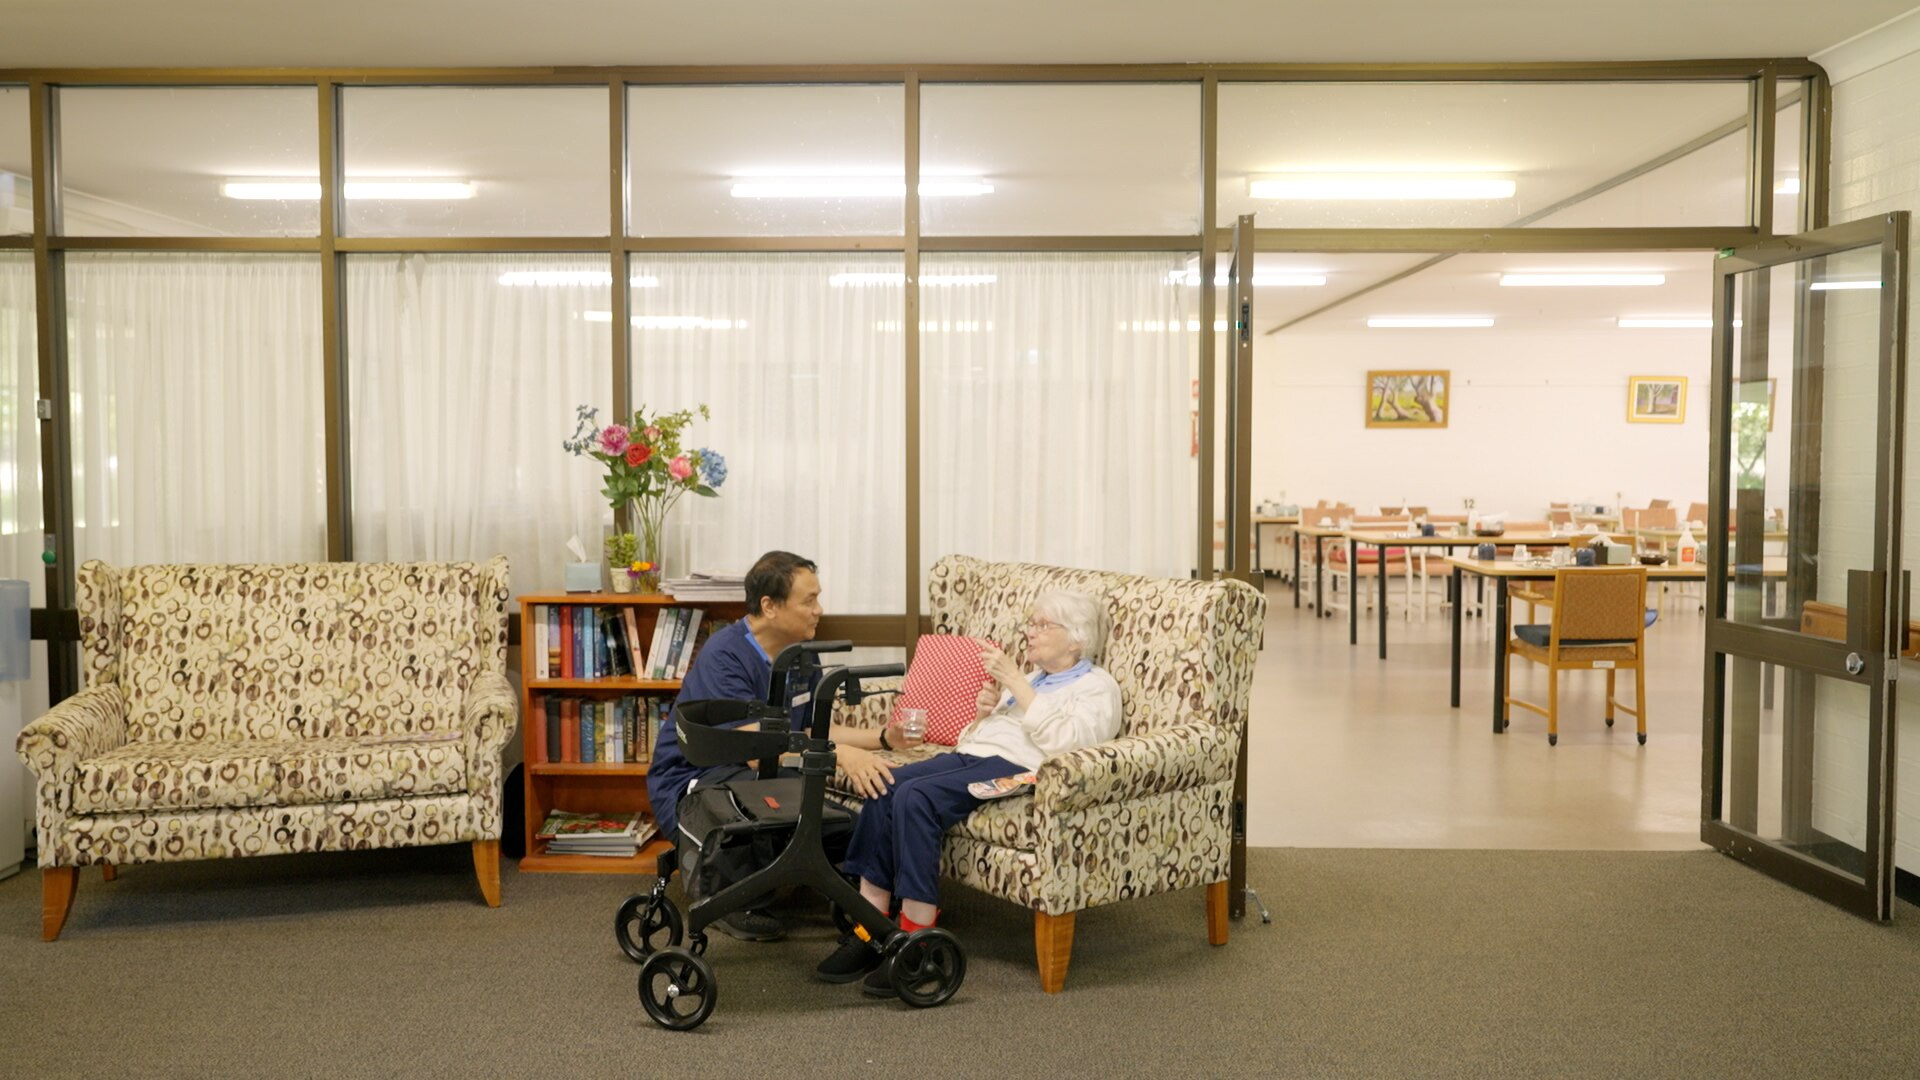 Male healthcare worker squats next to elderly woman seated on couch in the foyer of an aged care facility